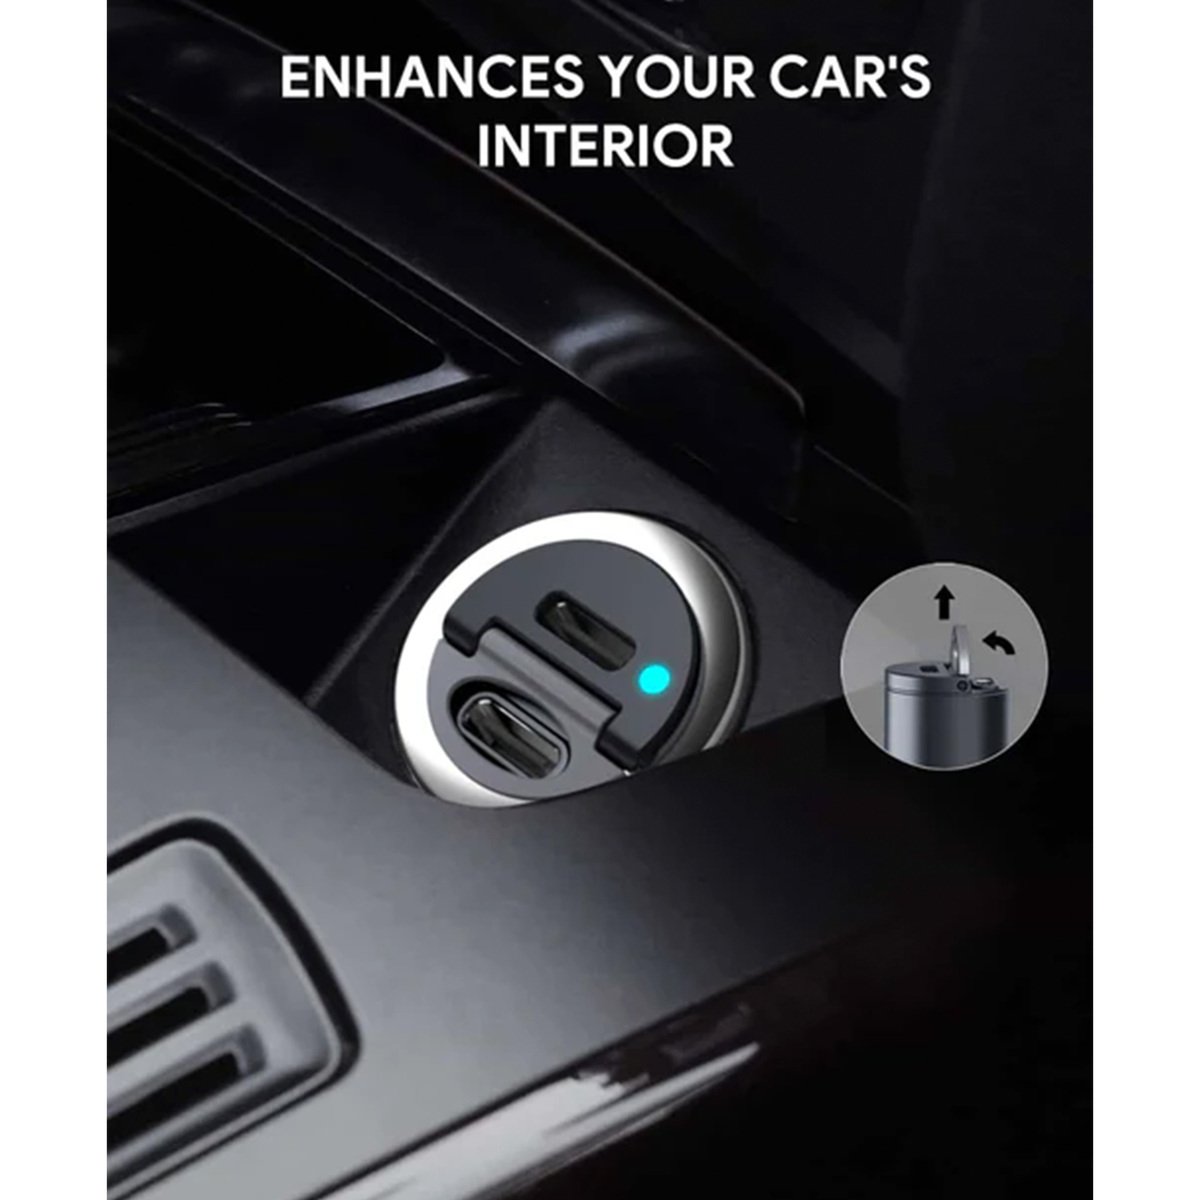 Aukey Dual Port Car Charger CCA4-BK 30W